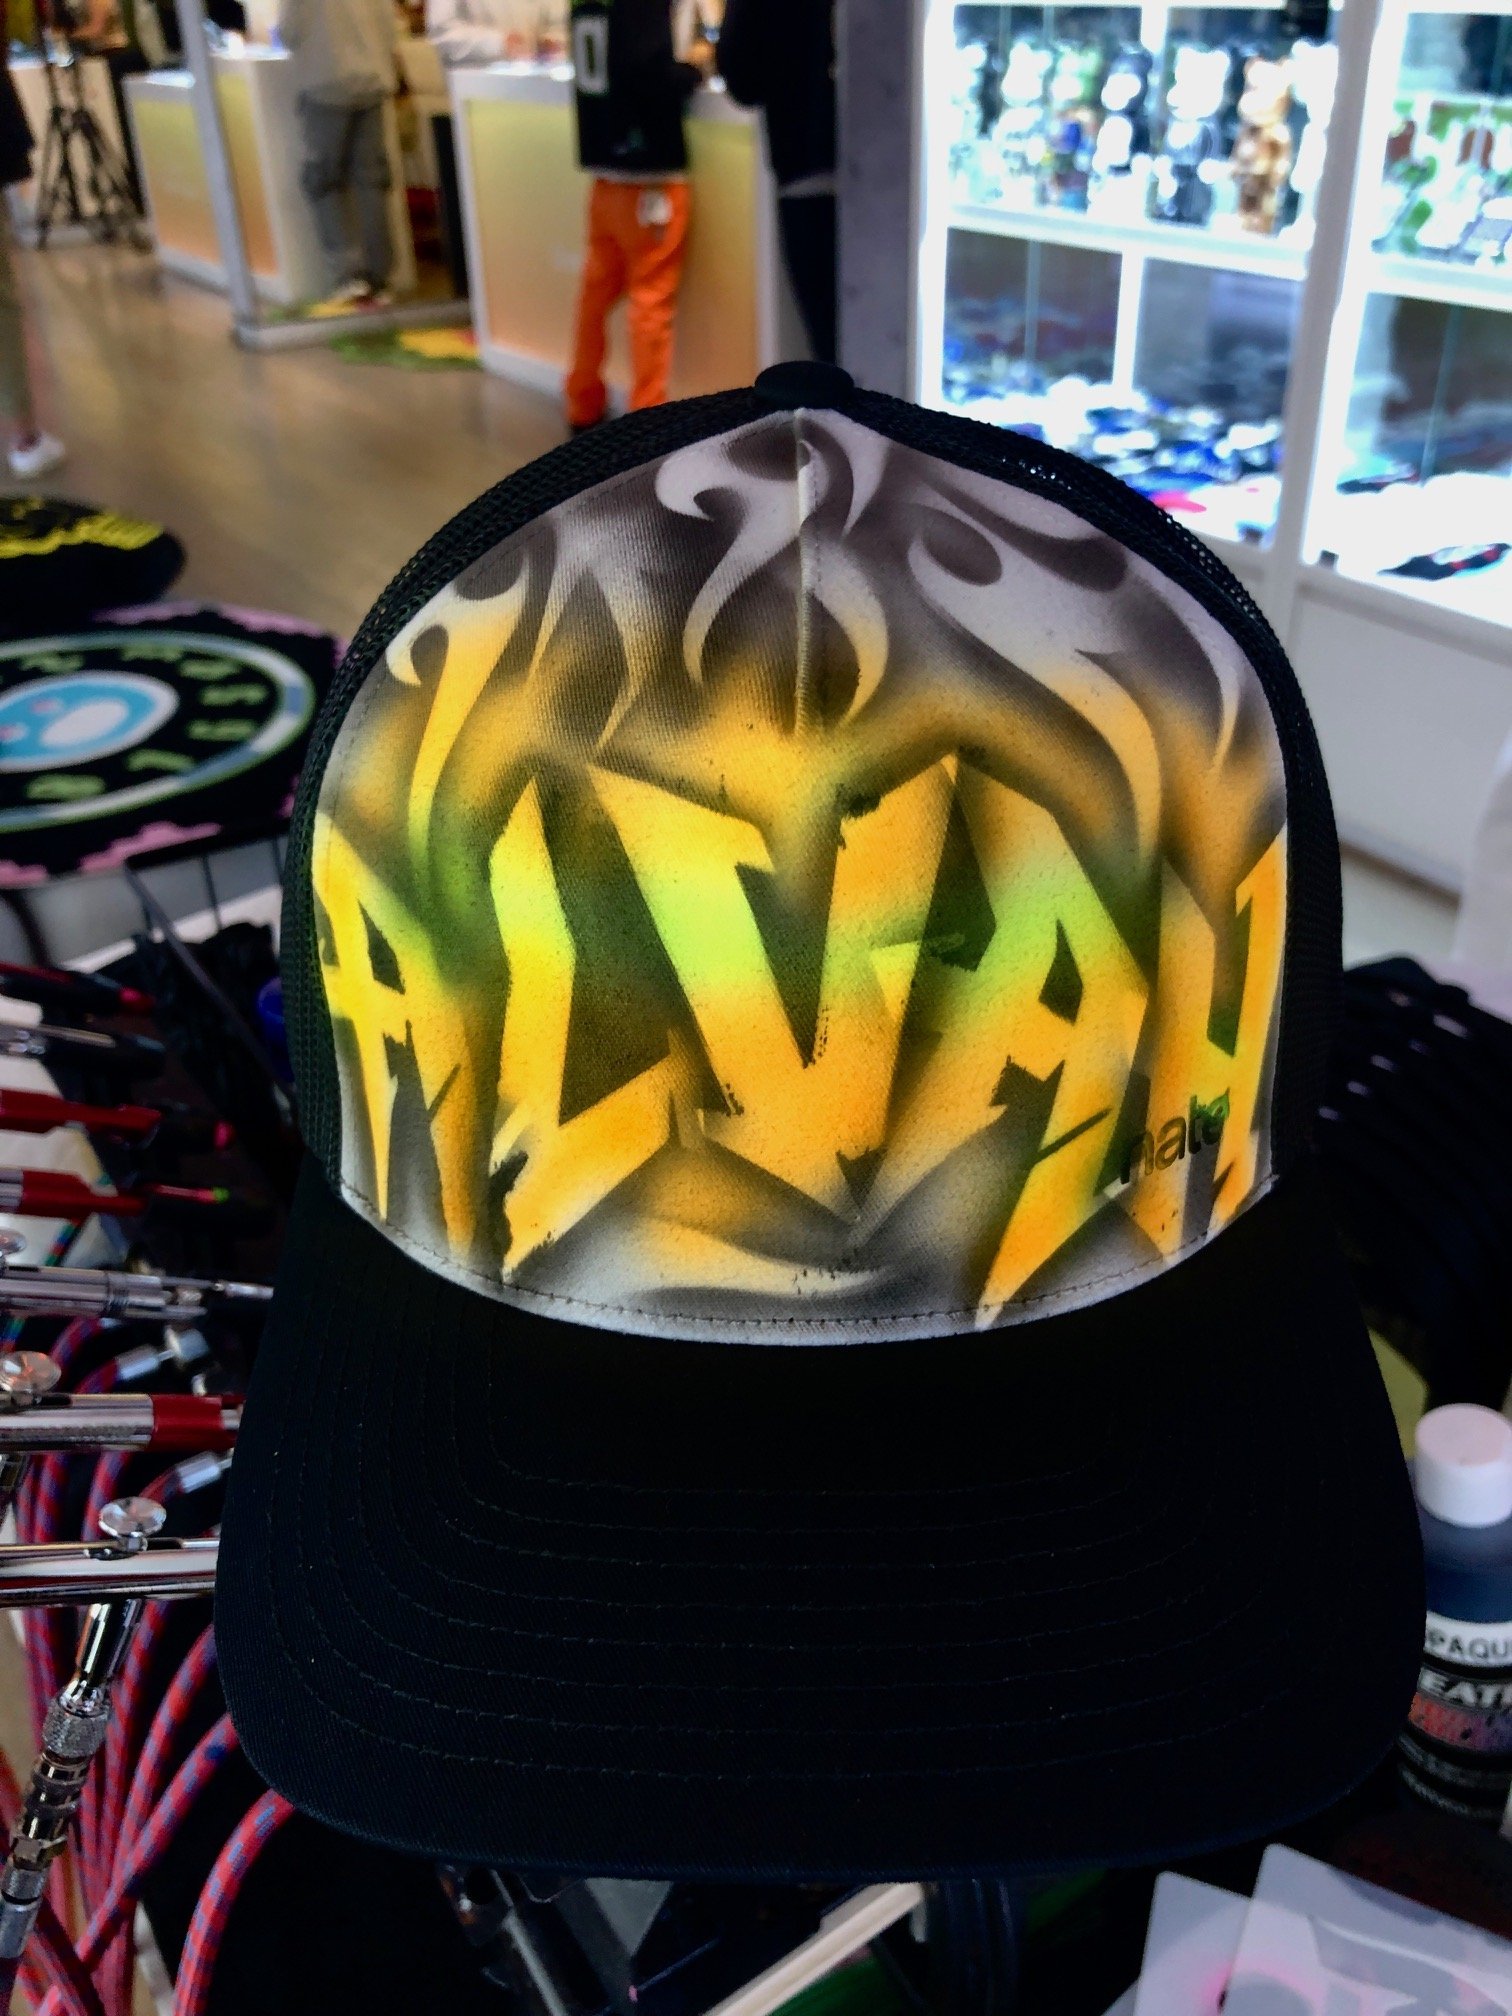 Airbrush Hats for Corporate Event NYC.jpg